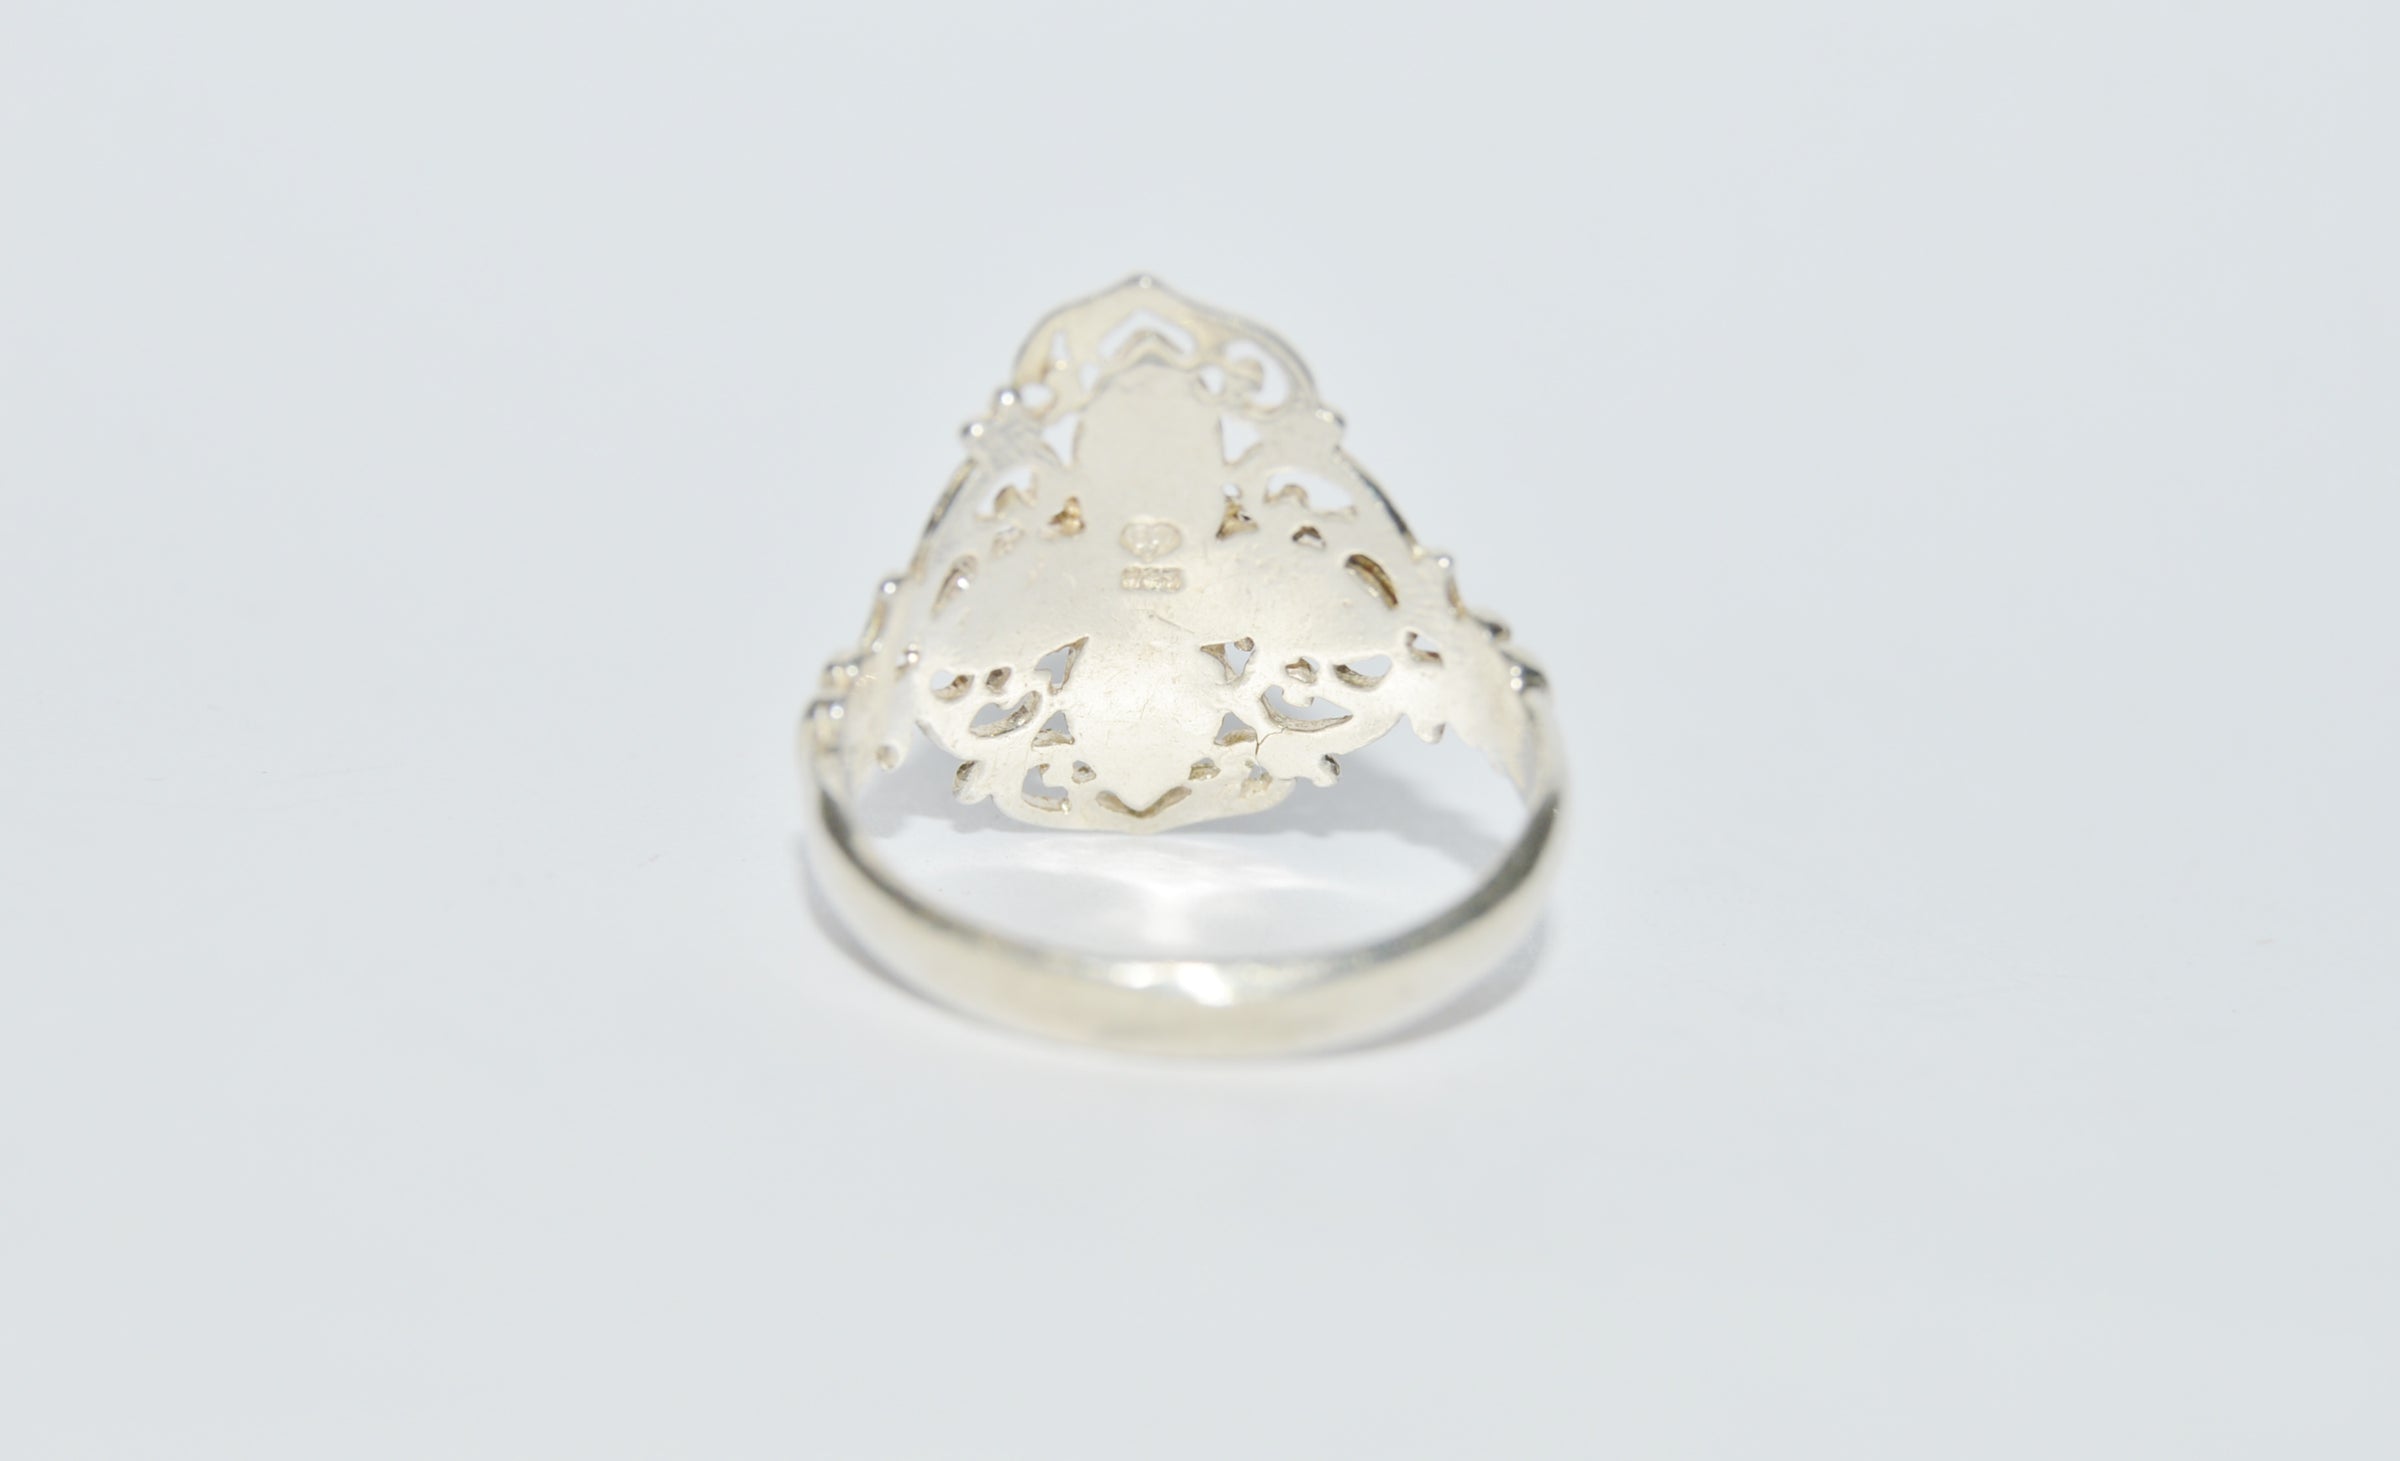 www.hersandhistreasures.com/products/925-sterling-silver-filigree-cross-ring